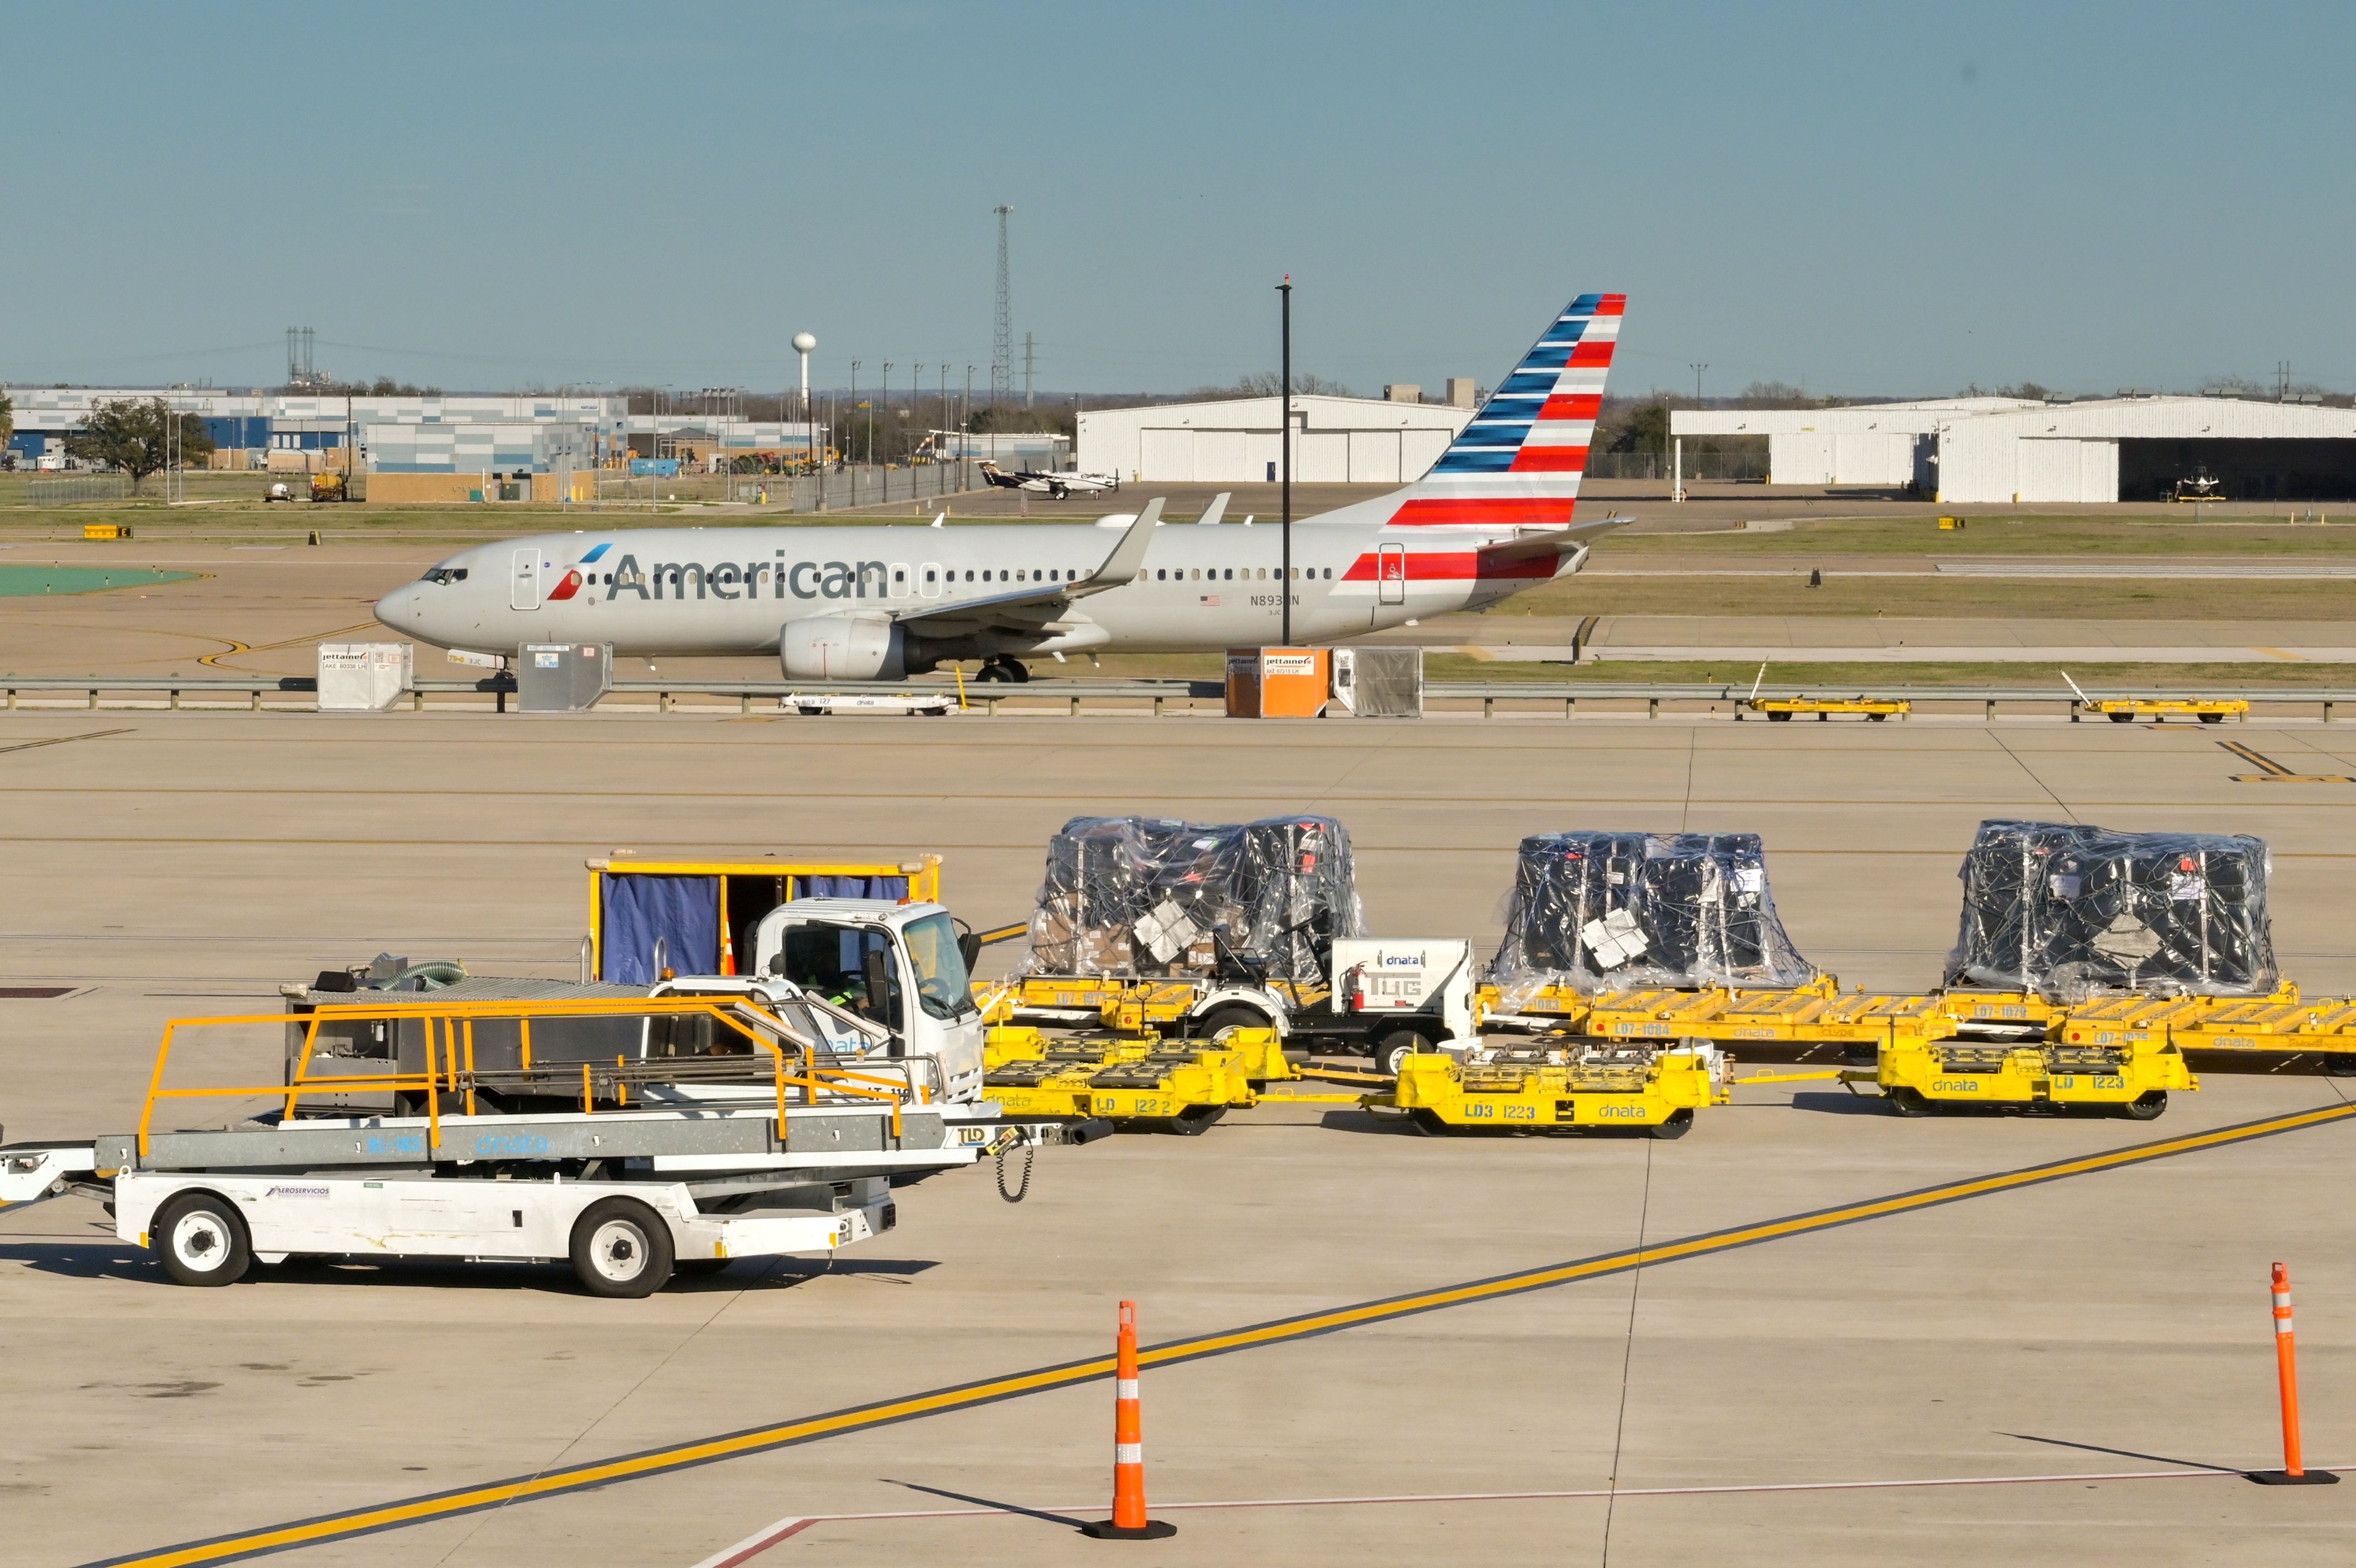 American Airlines Boeing 737 @ Austin Airport